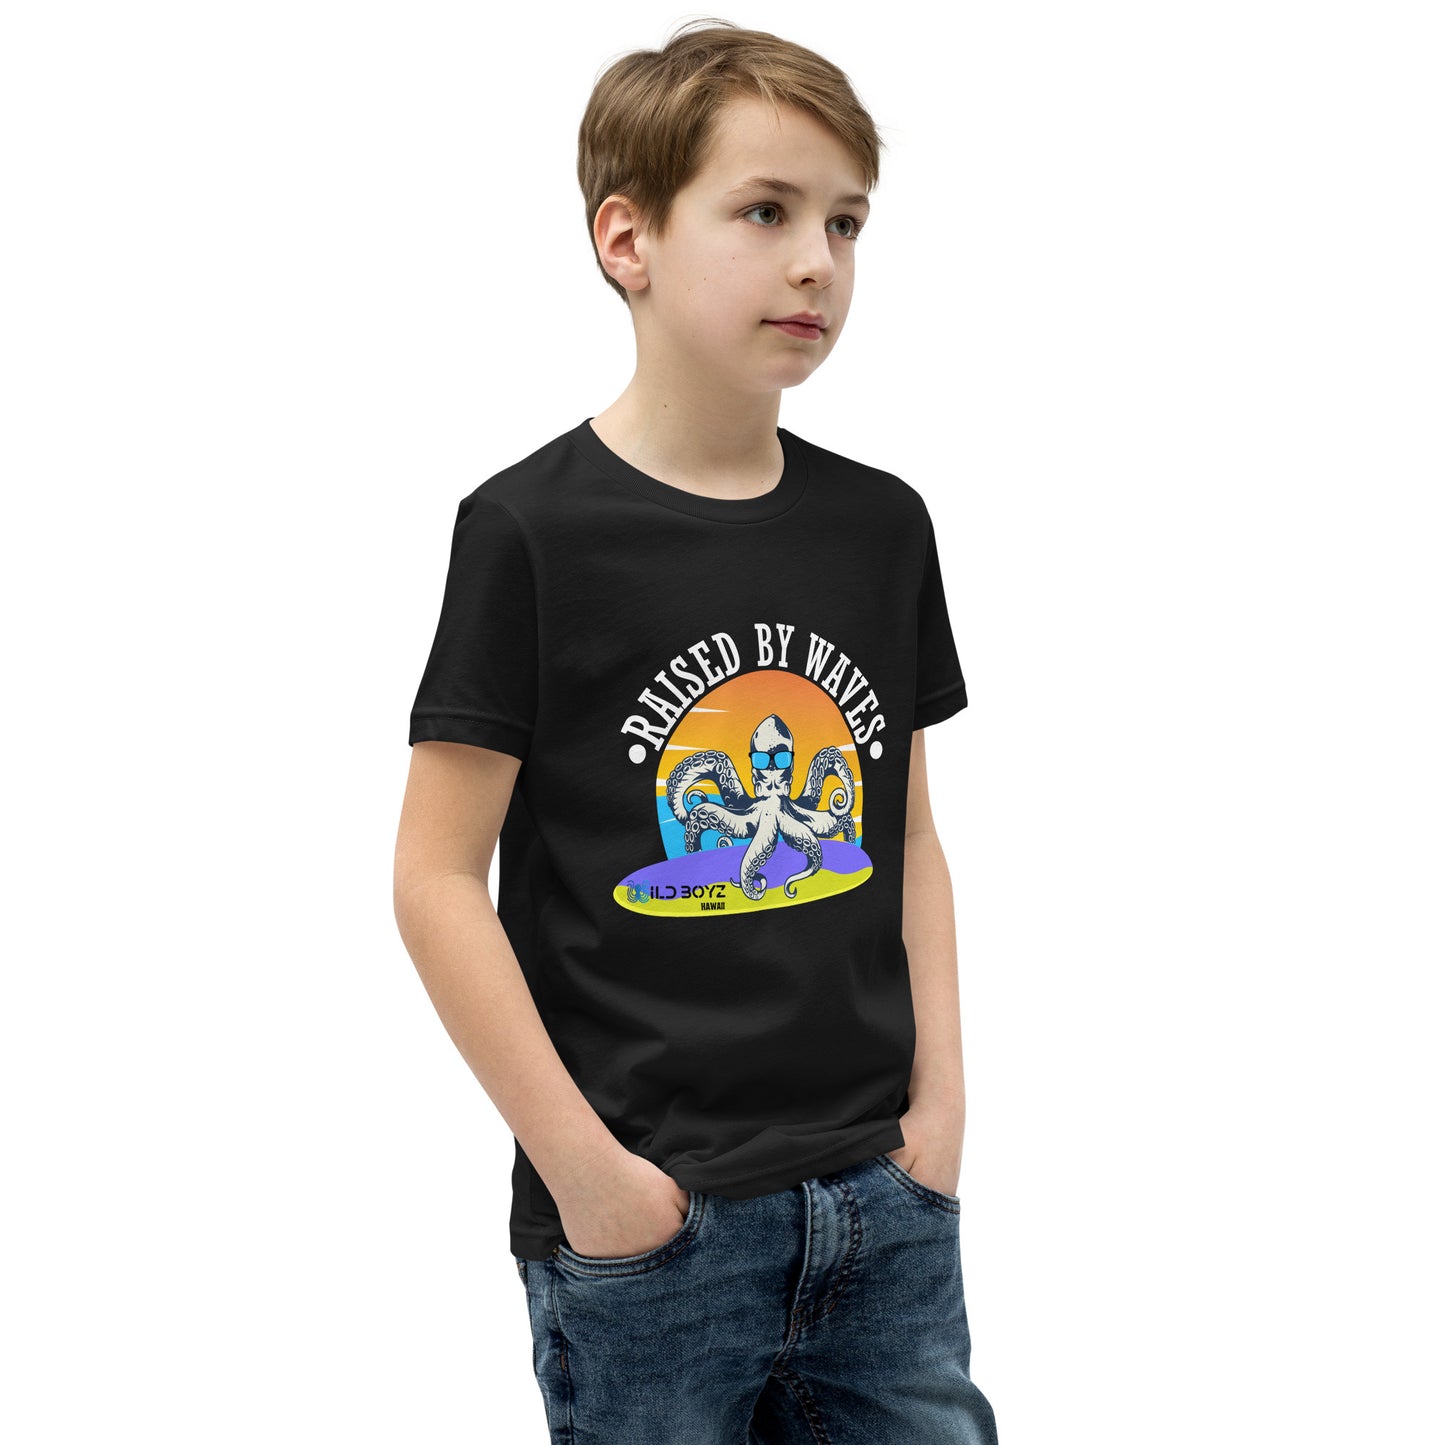 Raised By Waves Octopus Surfing Kids Youth T-Shirt